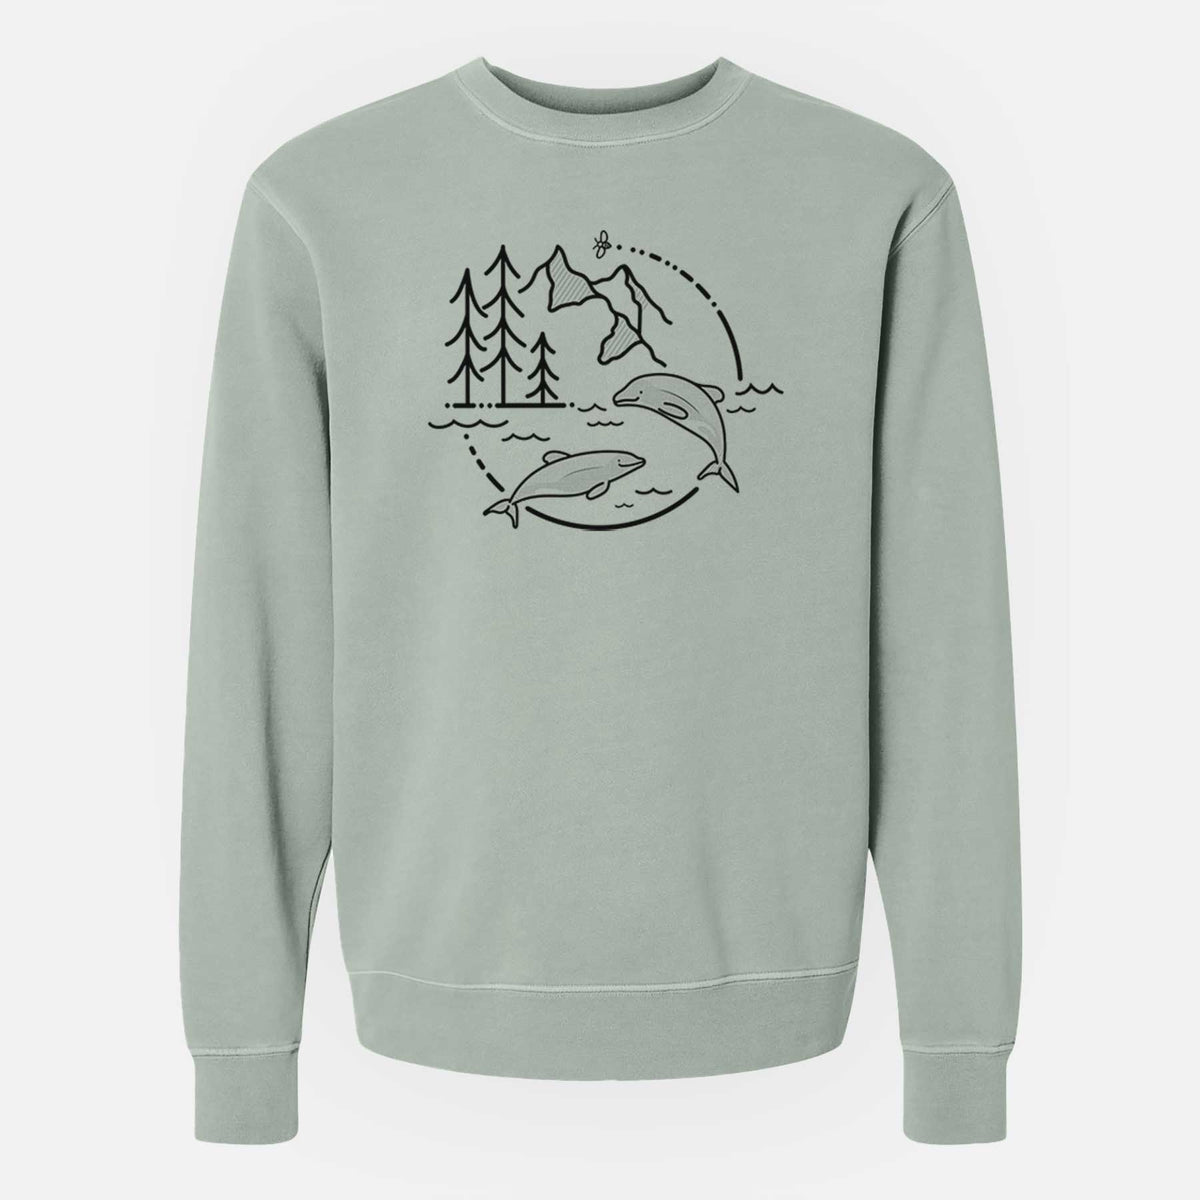 It&#39;s All Connected - Maui Dolphins - Unisex Pigment Dyed Crew Sweatshirt